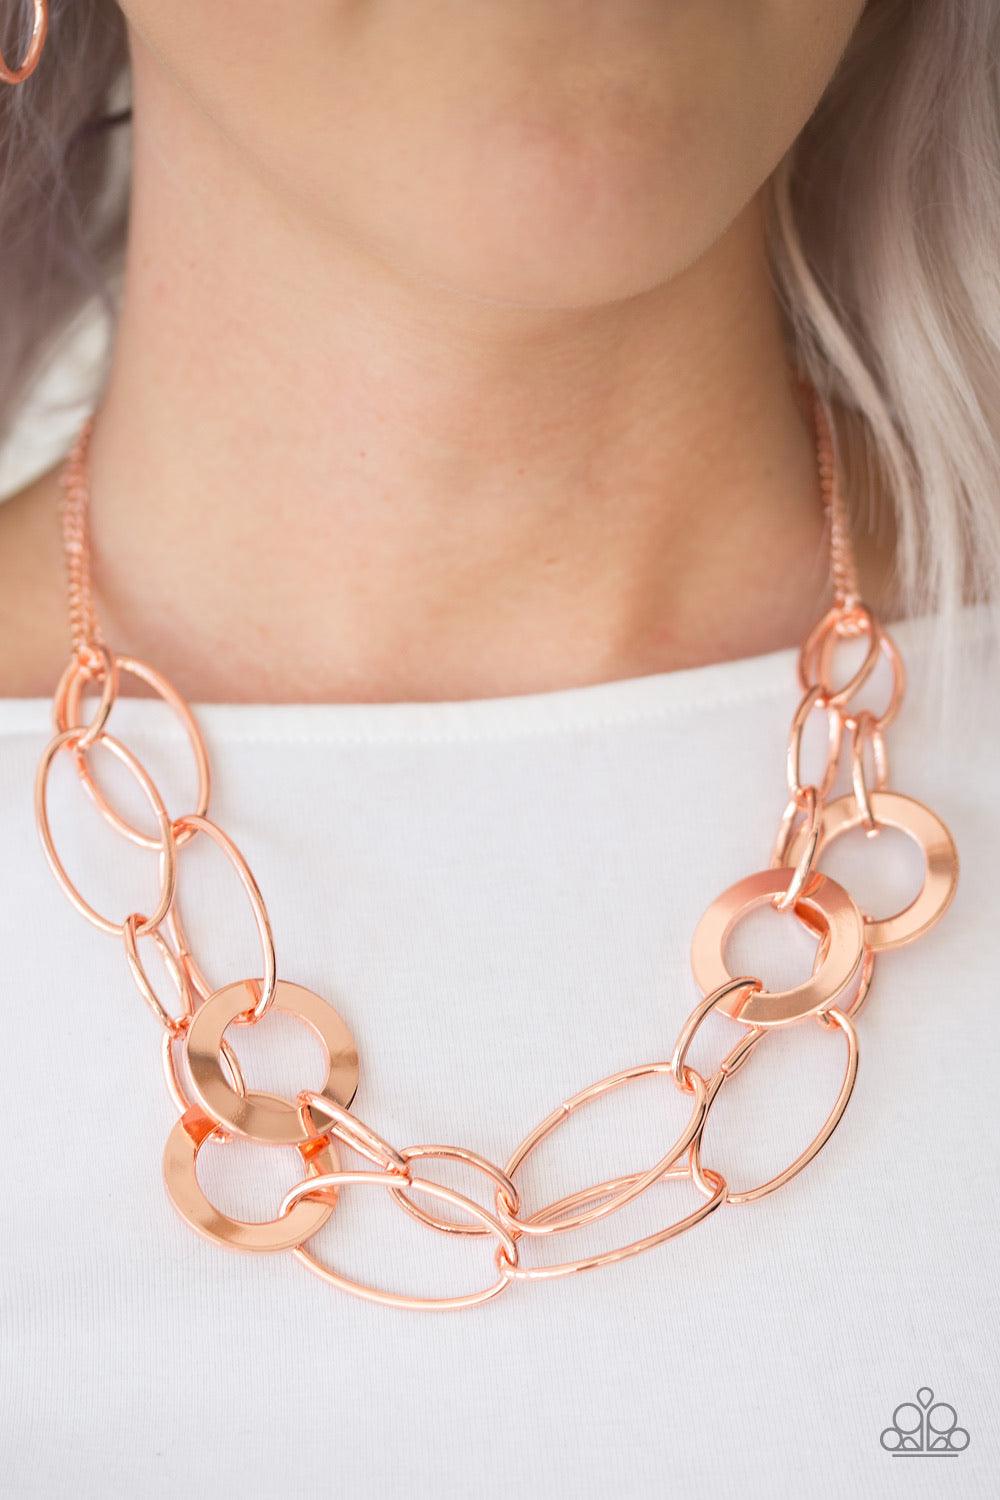 Paparazzi Accessories Metallic Maverick - Copper Mismatched shiny copper rings and hoops link below the collar in bold layers for a spunky industrial look. Features an adjustable clasp closure. Sold as one individual necklace. Includes one pair of matchin